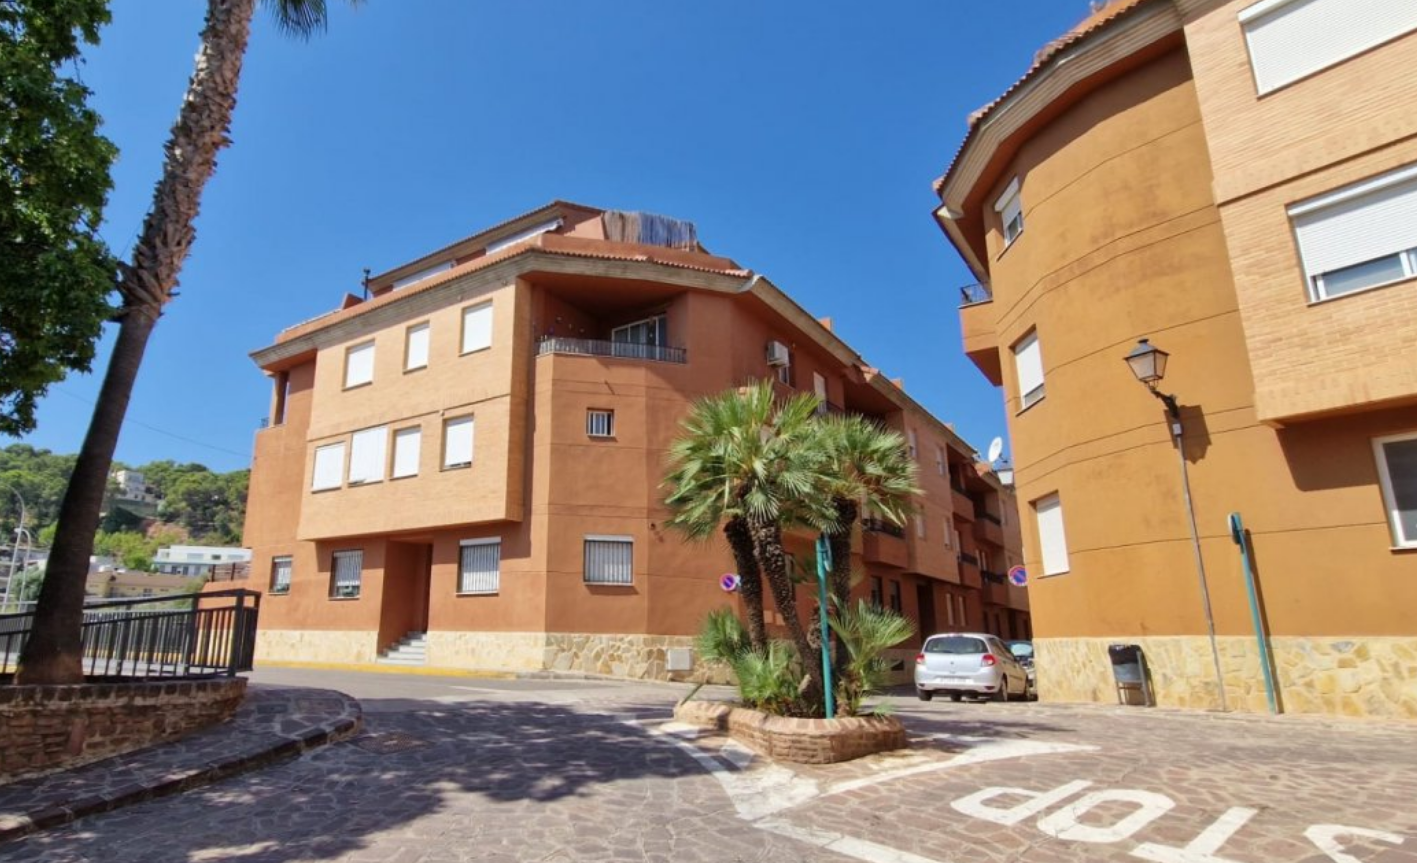 Apartment in Serra, Valencia with 3 bedrooms and 2 bathrooms